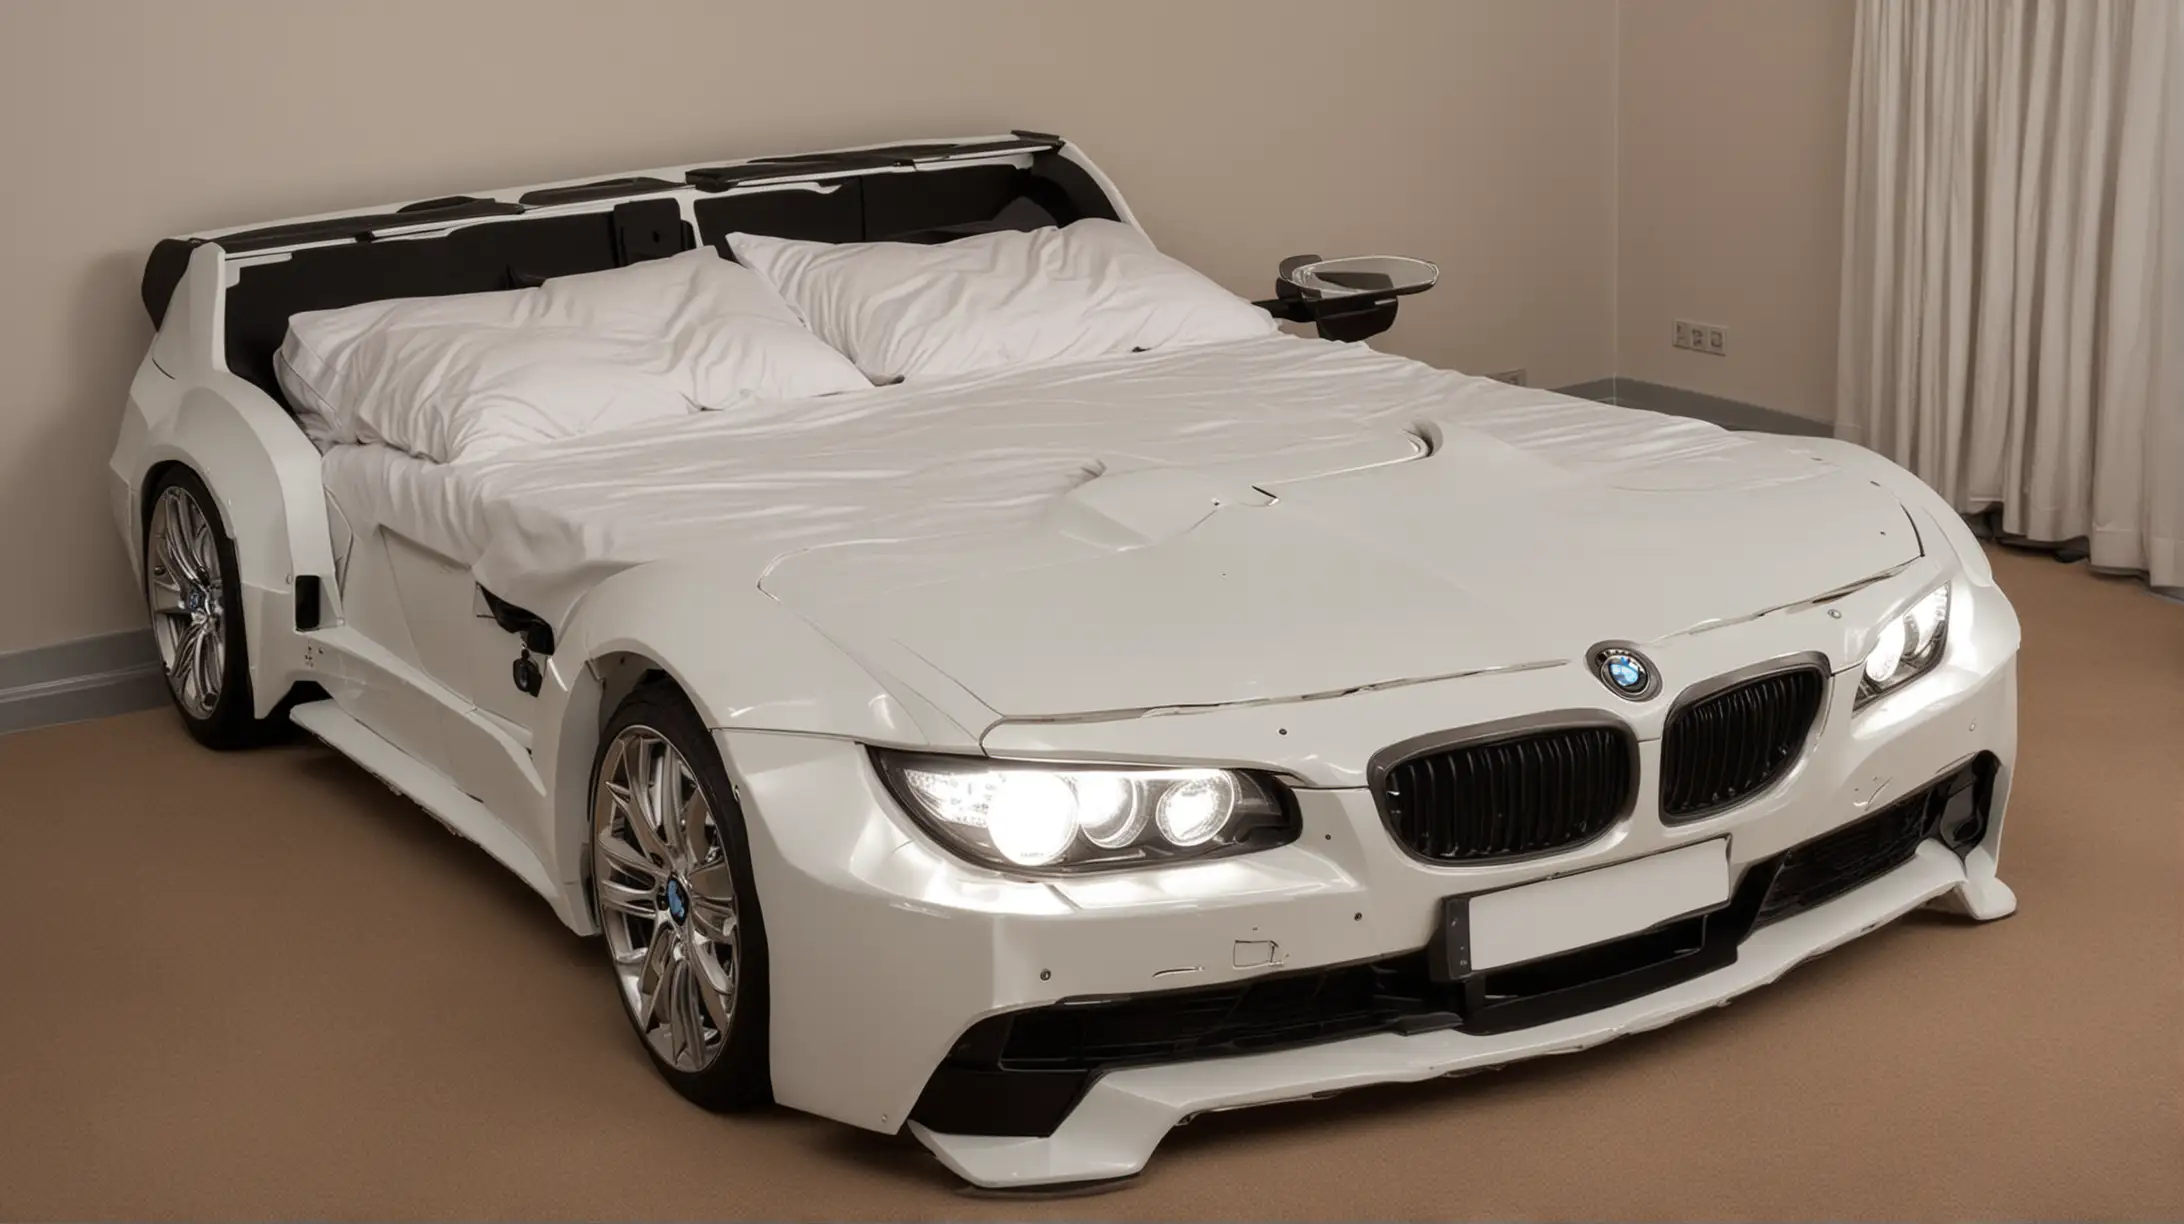 Luxurious BMW CarShaped Double Bed with Illuminated Headlights